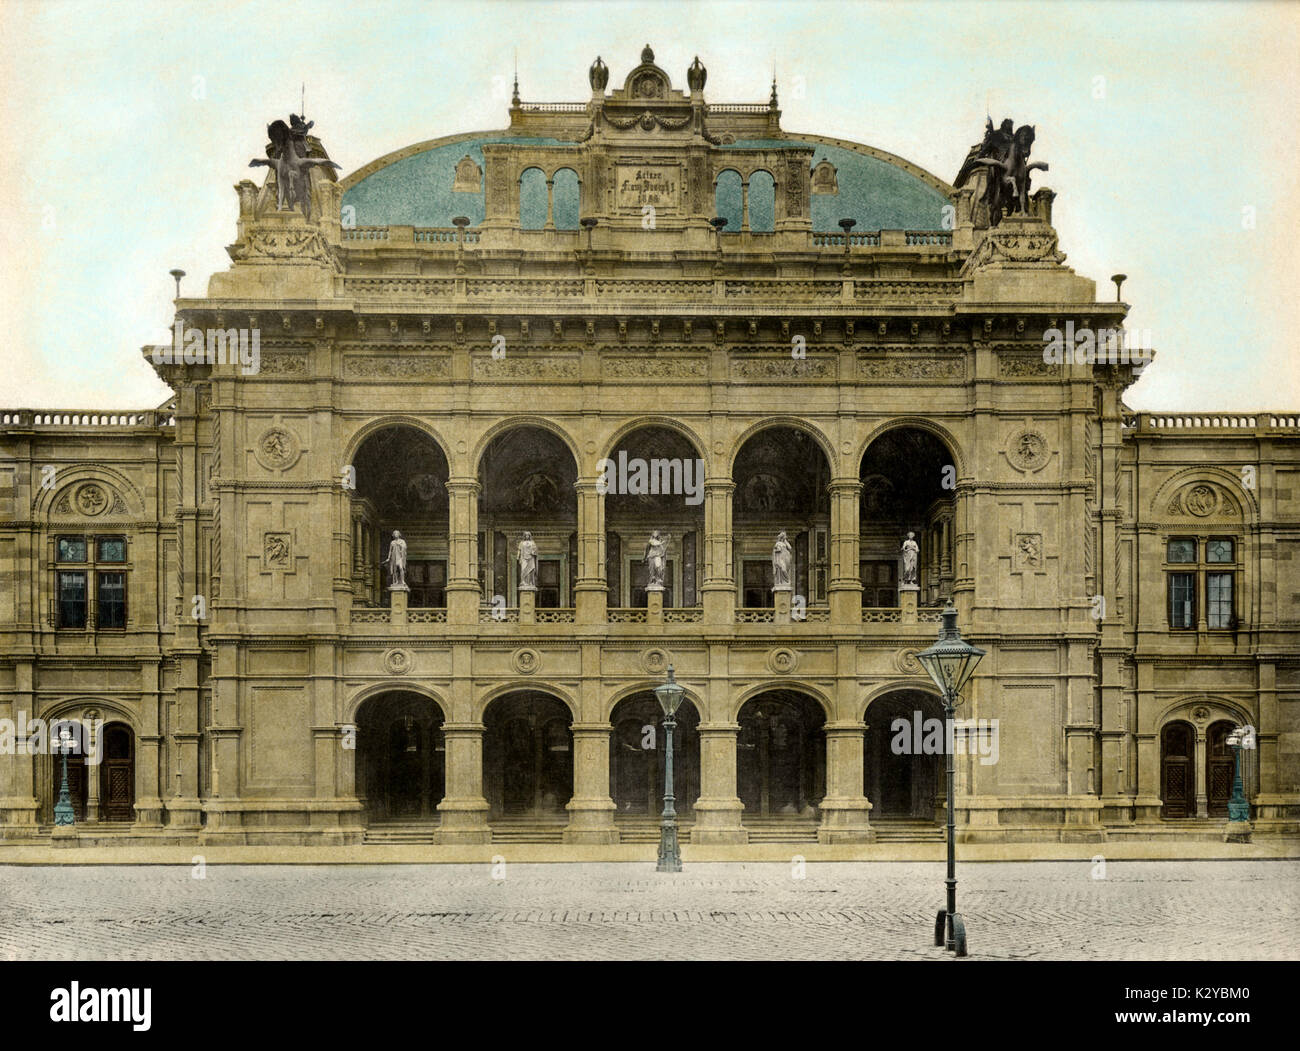 VIENNA OPERA HOUSE - main facade, c.1900 Opened in 1869. Enjoyed its greatest triumphs under the direction of Gustav Mahler (1897-1907).  Mozart and mahler connection. Stock Photo